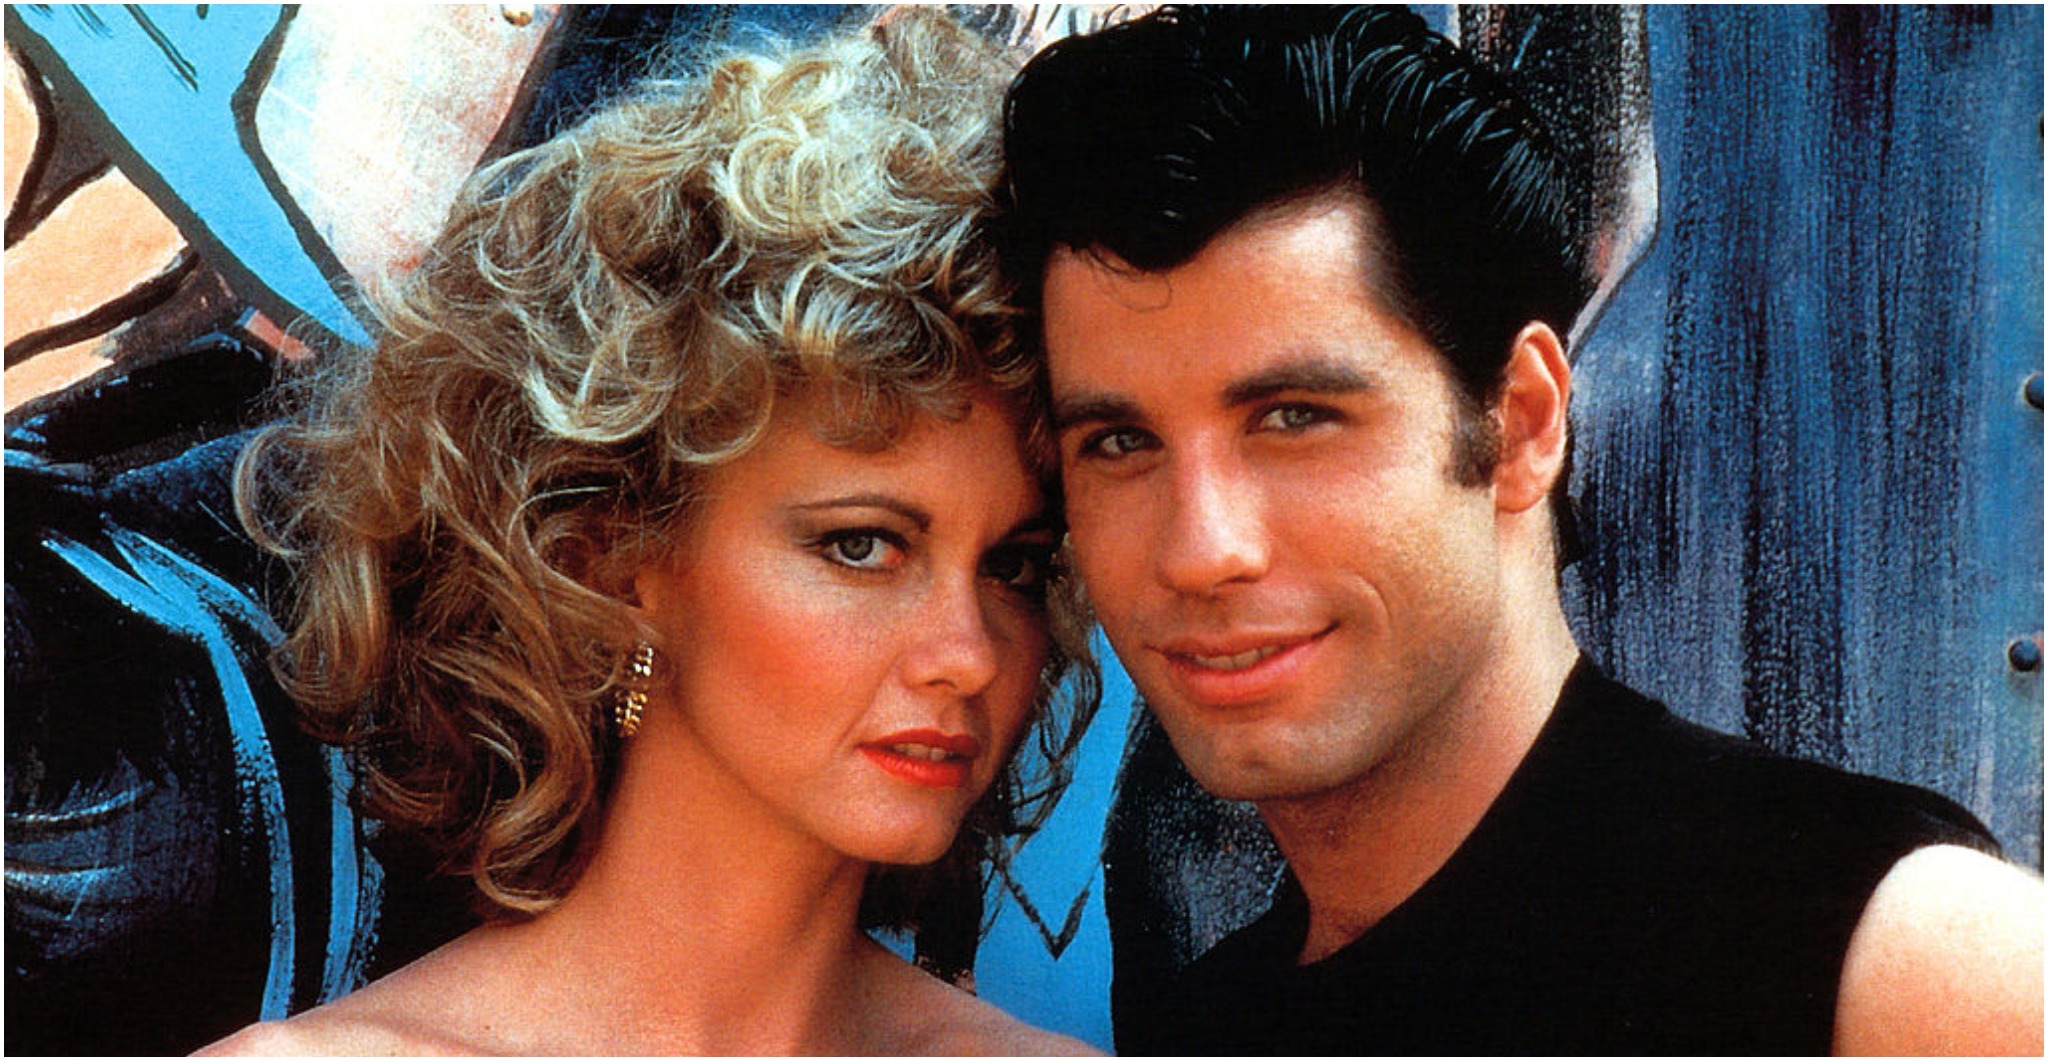 Olivia Newton-John and John Travolta in Grease (1978). Photo by Paramount/Getty Images